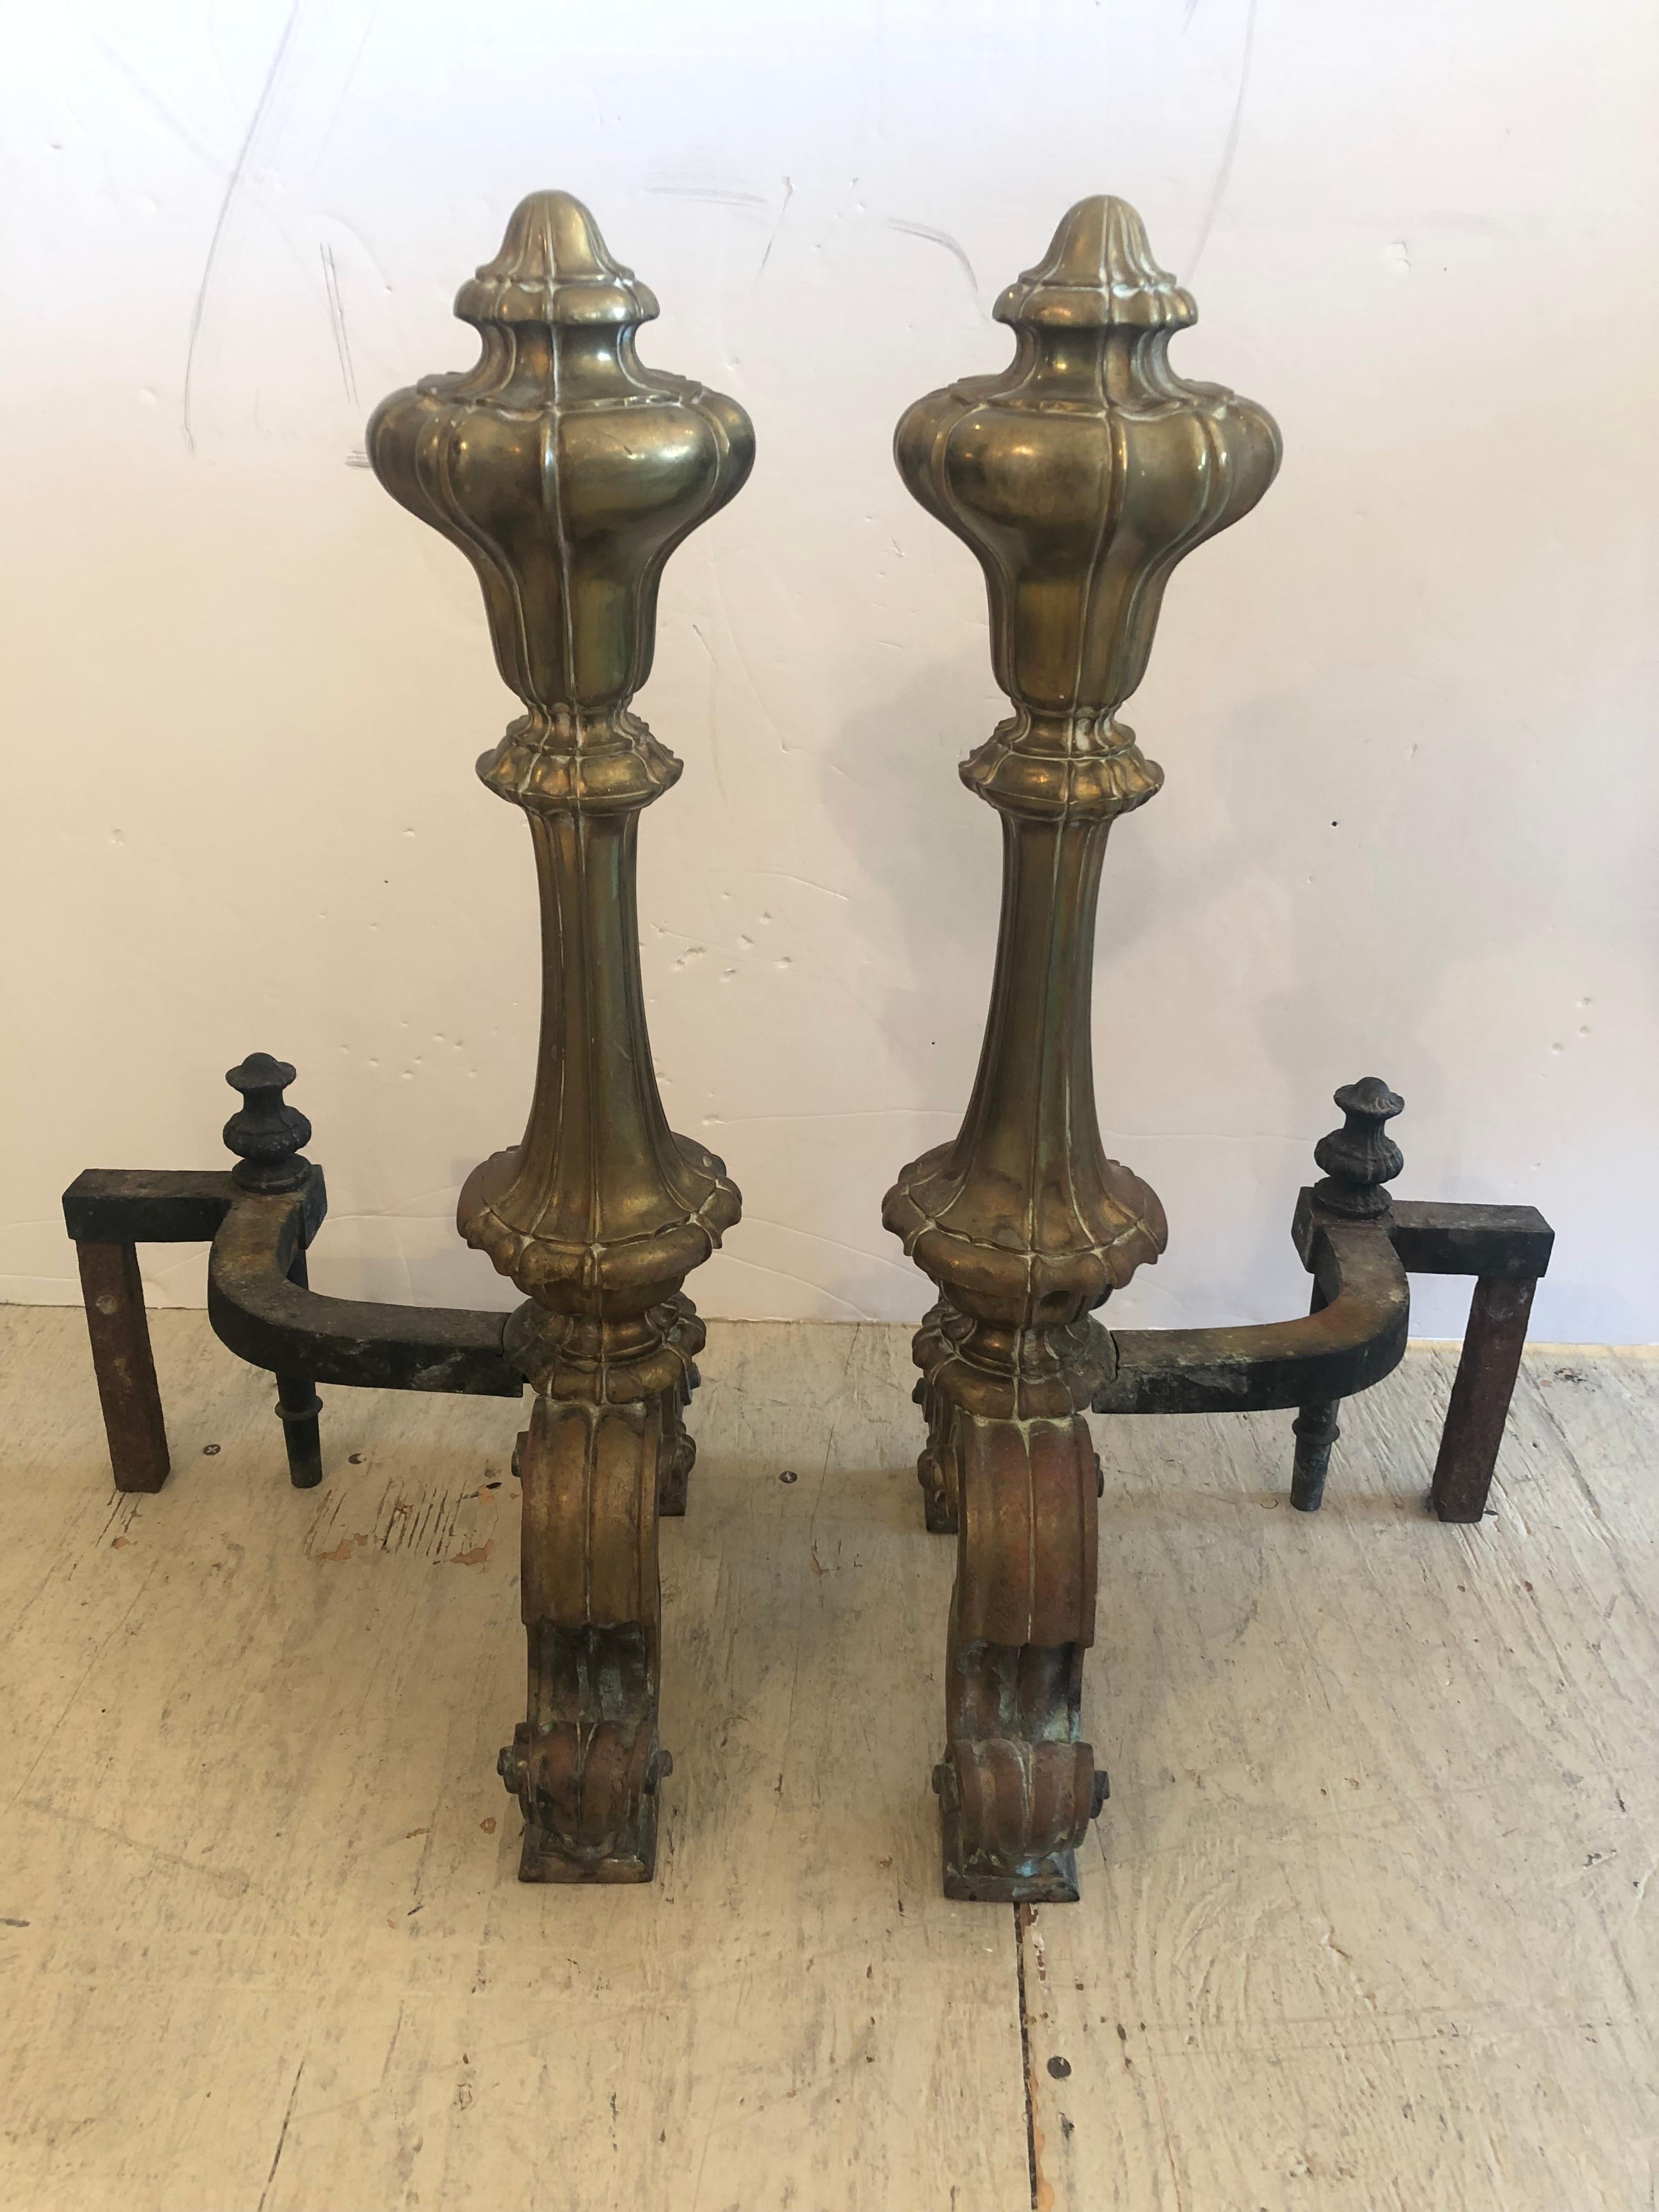 Elegant cast bronze andiron chenets having beautiful detailing and grand shapely finials.